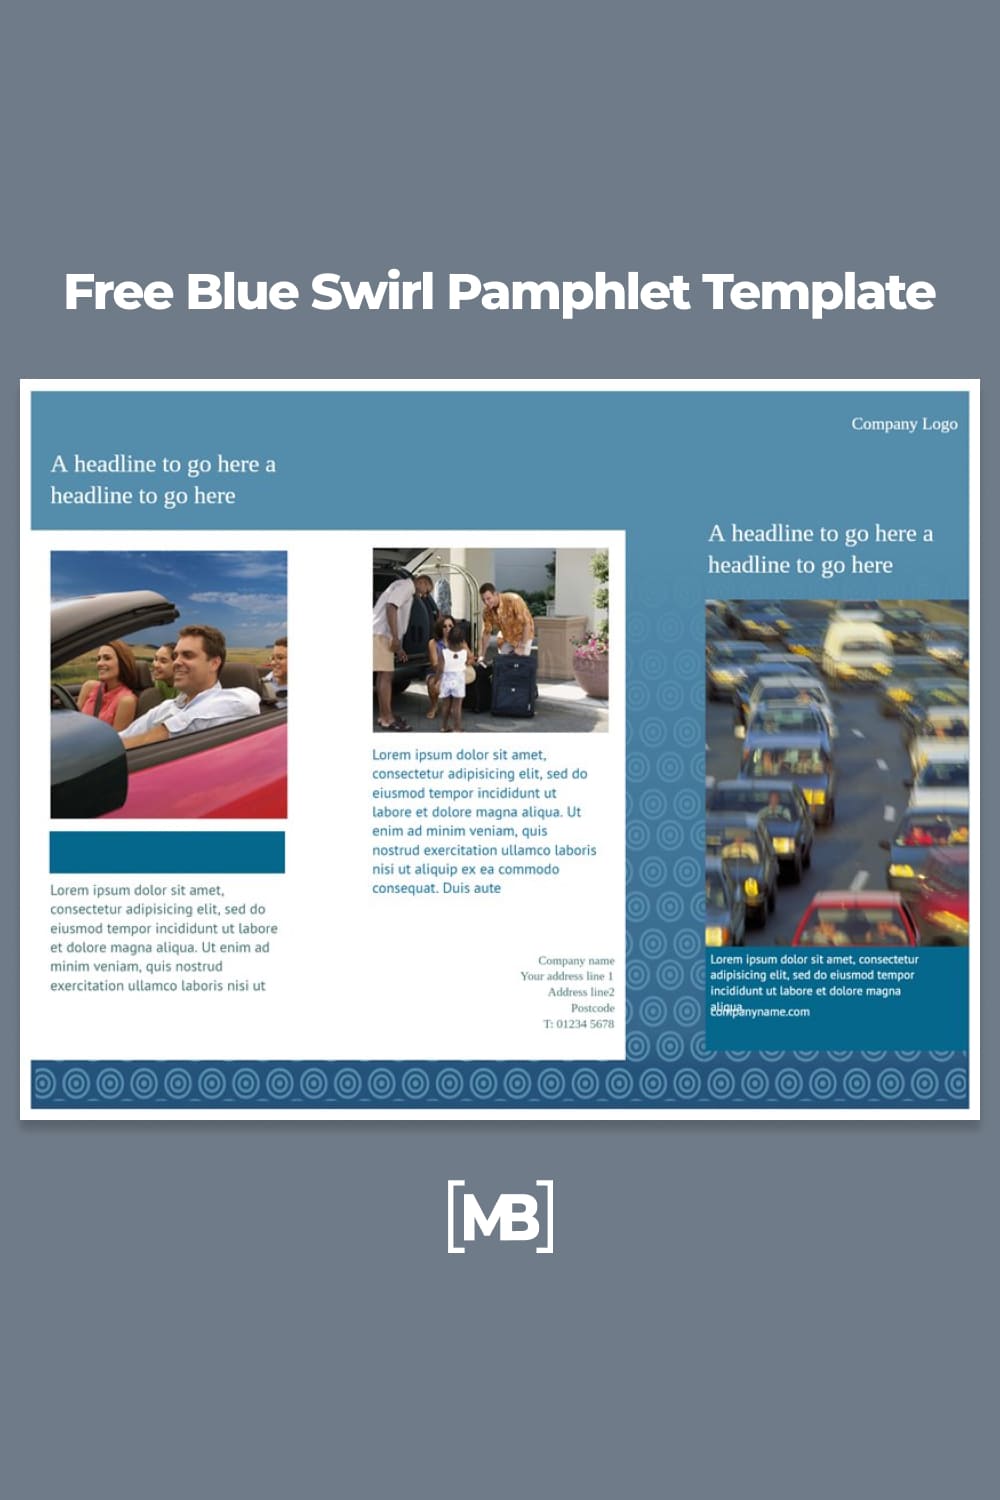 Blue swirl pamphlet template.